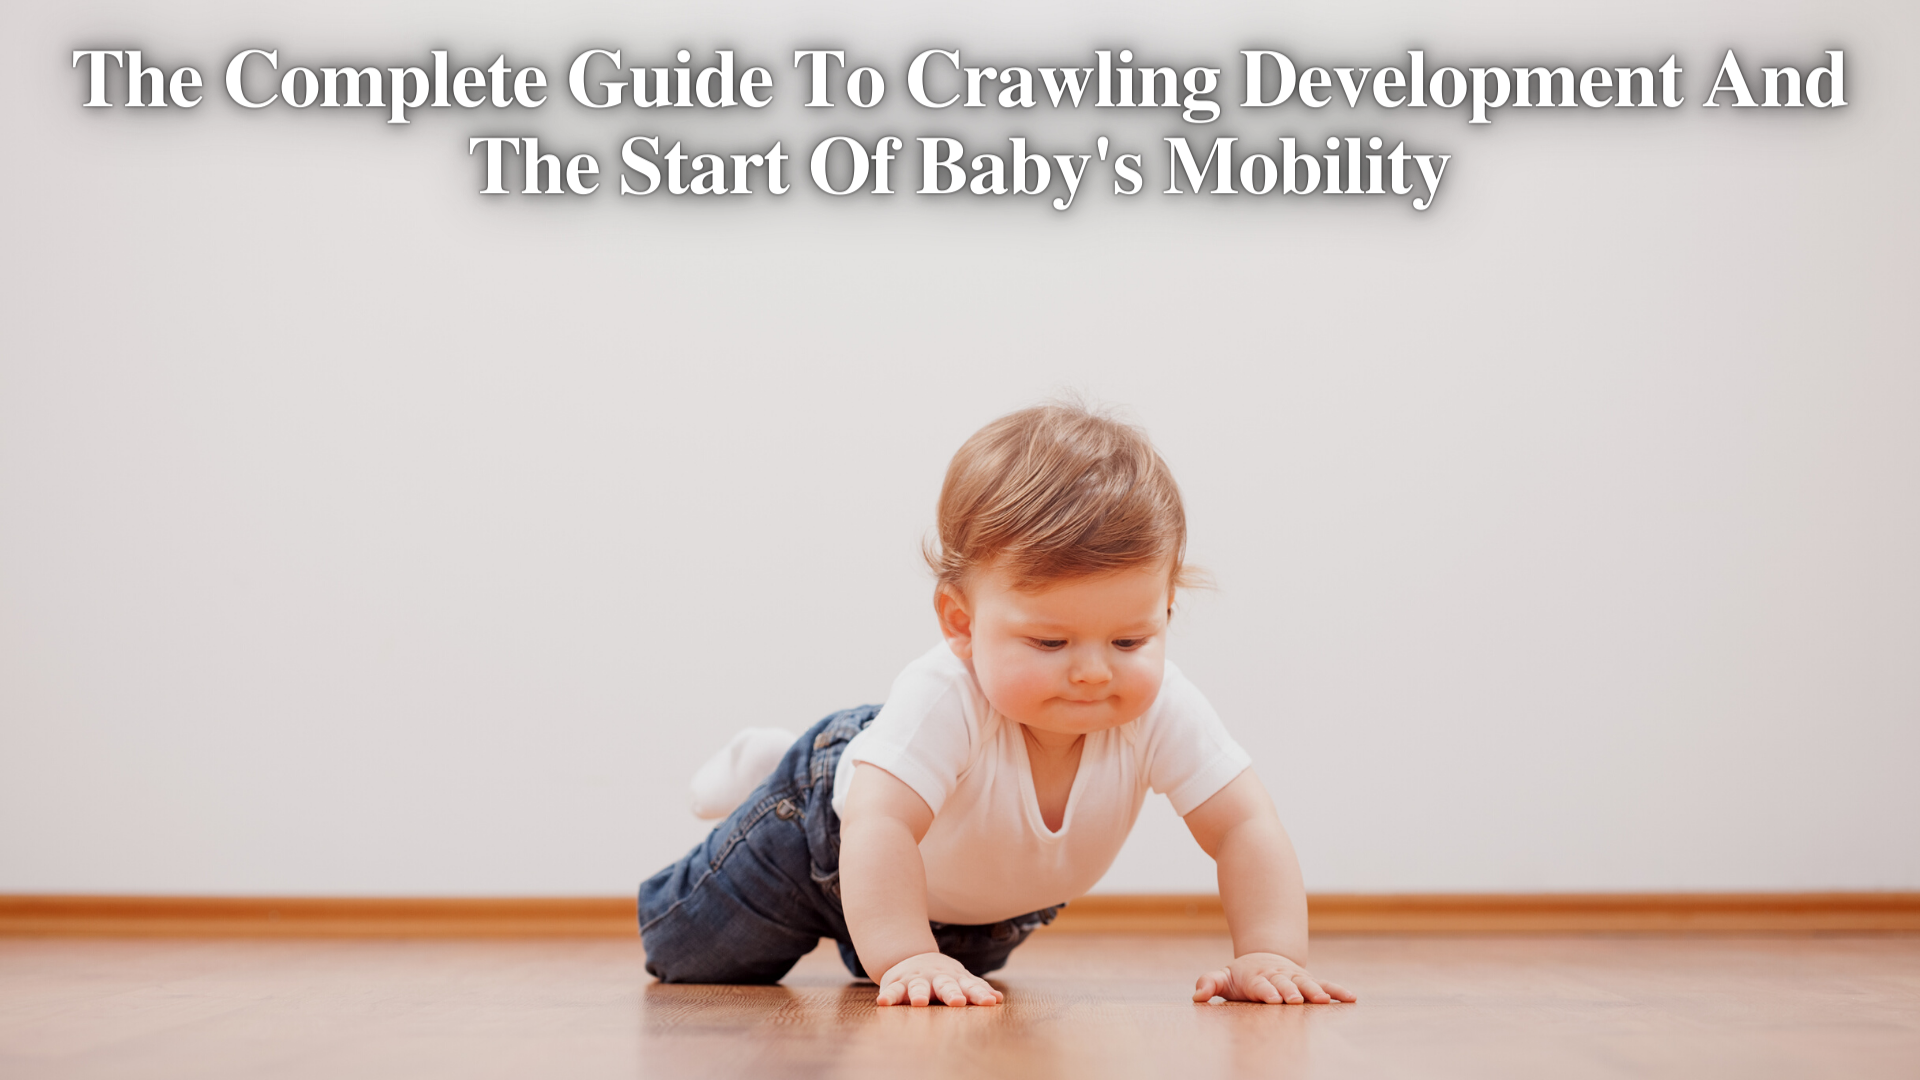 The Complete Guide To Crawling Development And The Start Of Baby's Mobility